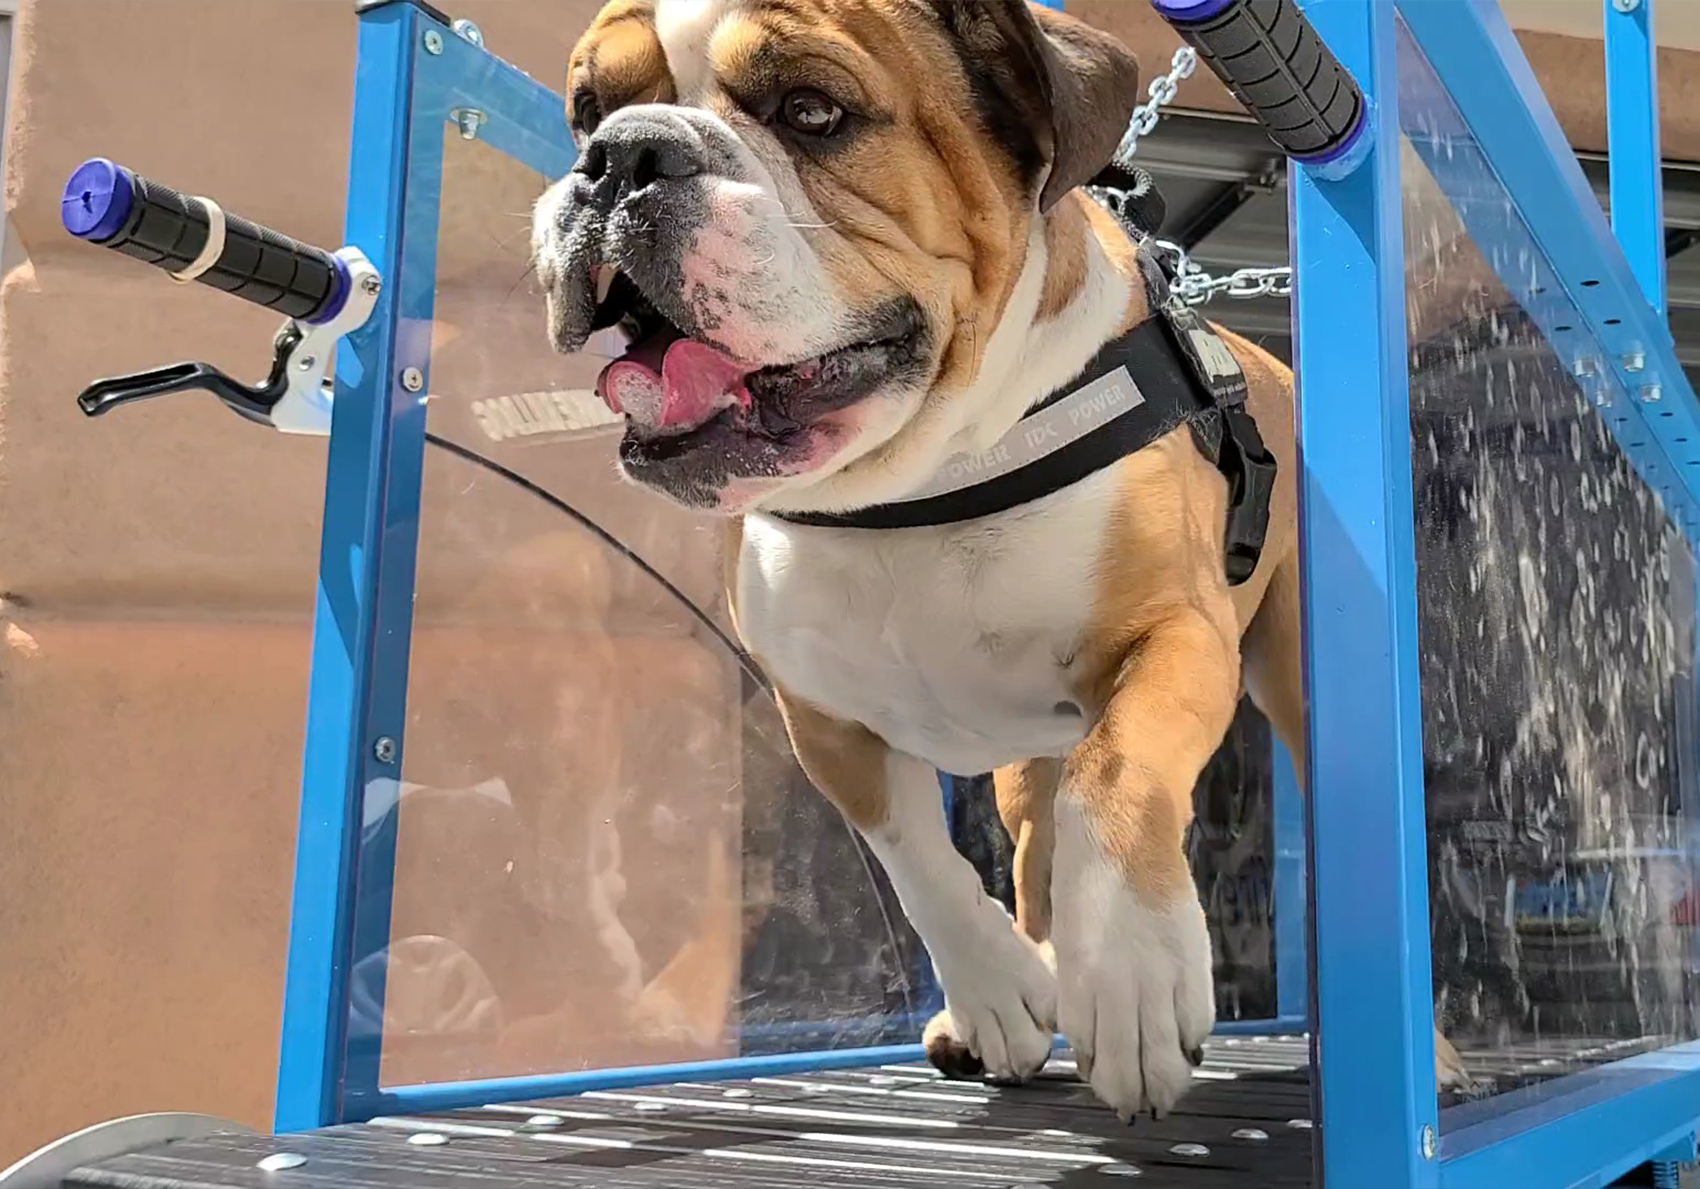 Why Use Treadmills To Run Dogs?